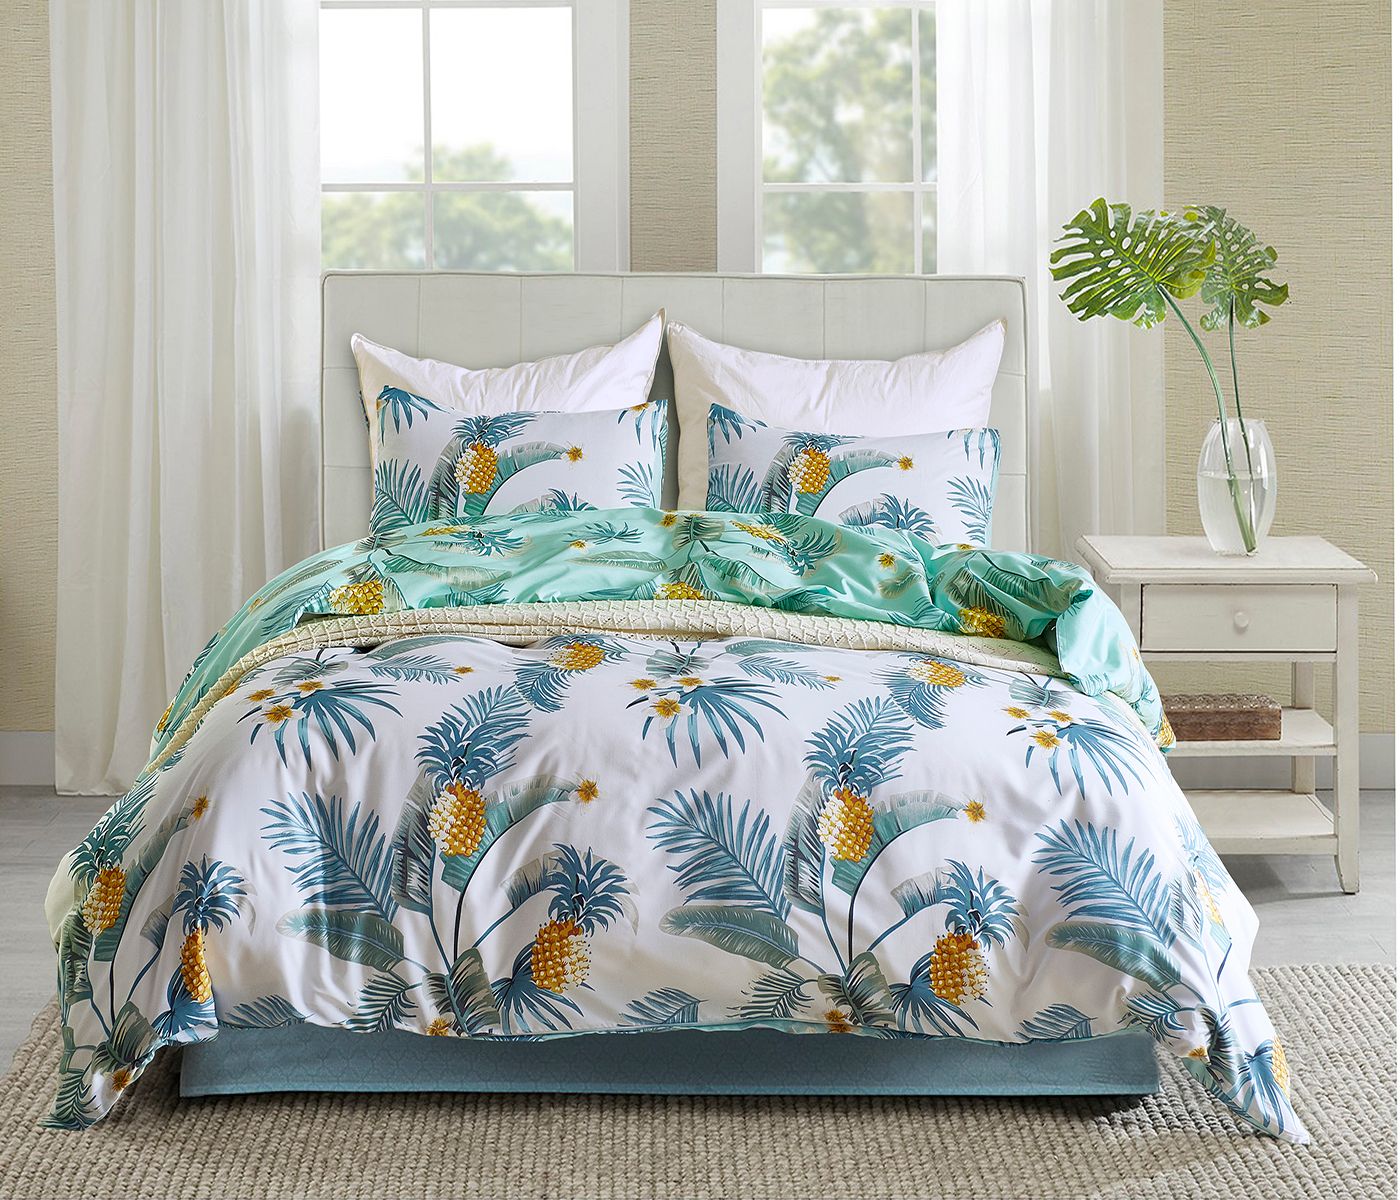 2020 Lucky Printed Sheet King Size Tropical Leaves Duvet Cover Set